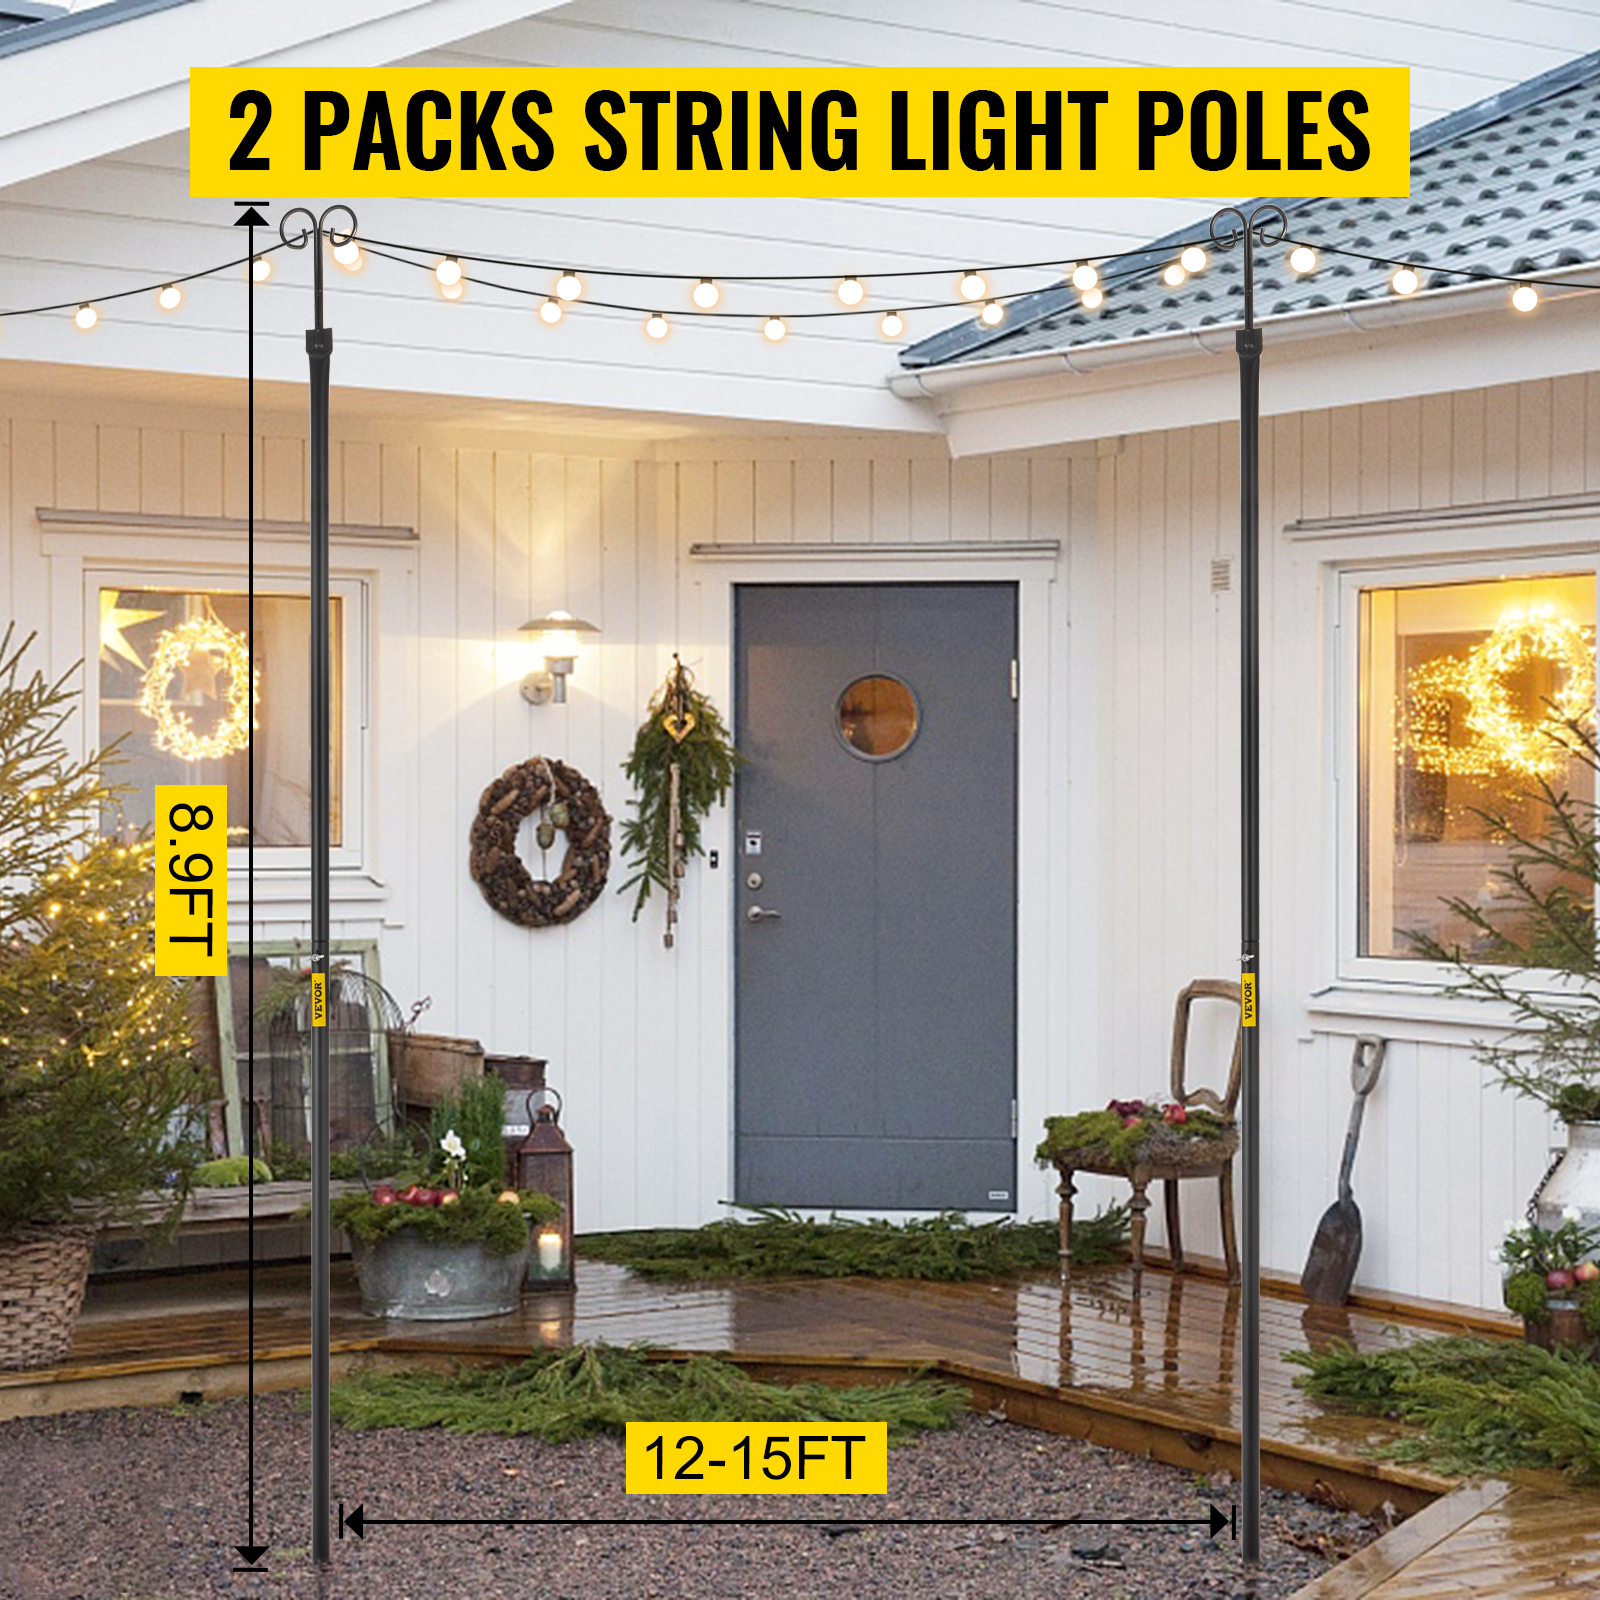 VEVOR String Light Poles, 2 Pack 9.7 FT, Outdoor Powder Coated Steel Lamp  Post with Hooks to Hang Lantern and Flags, Decorate Garden, Backyard,  Patio